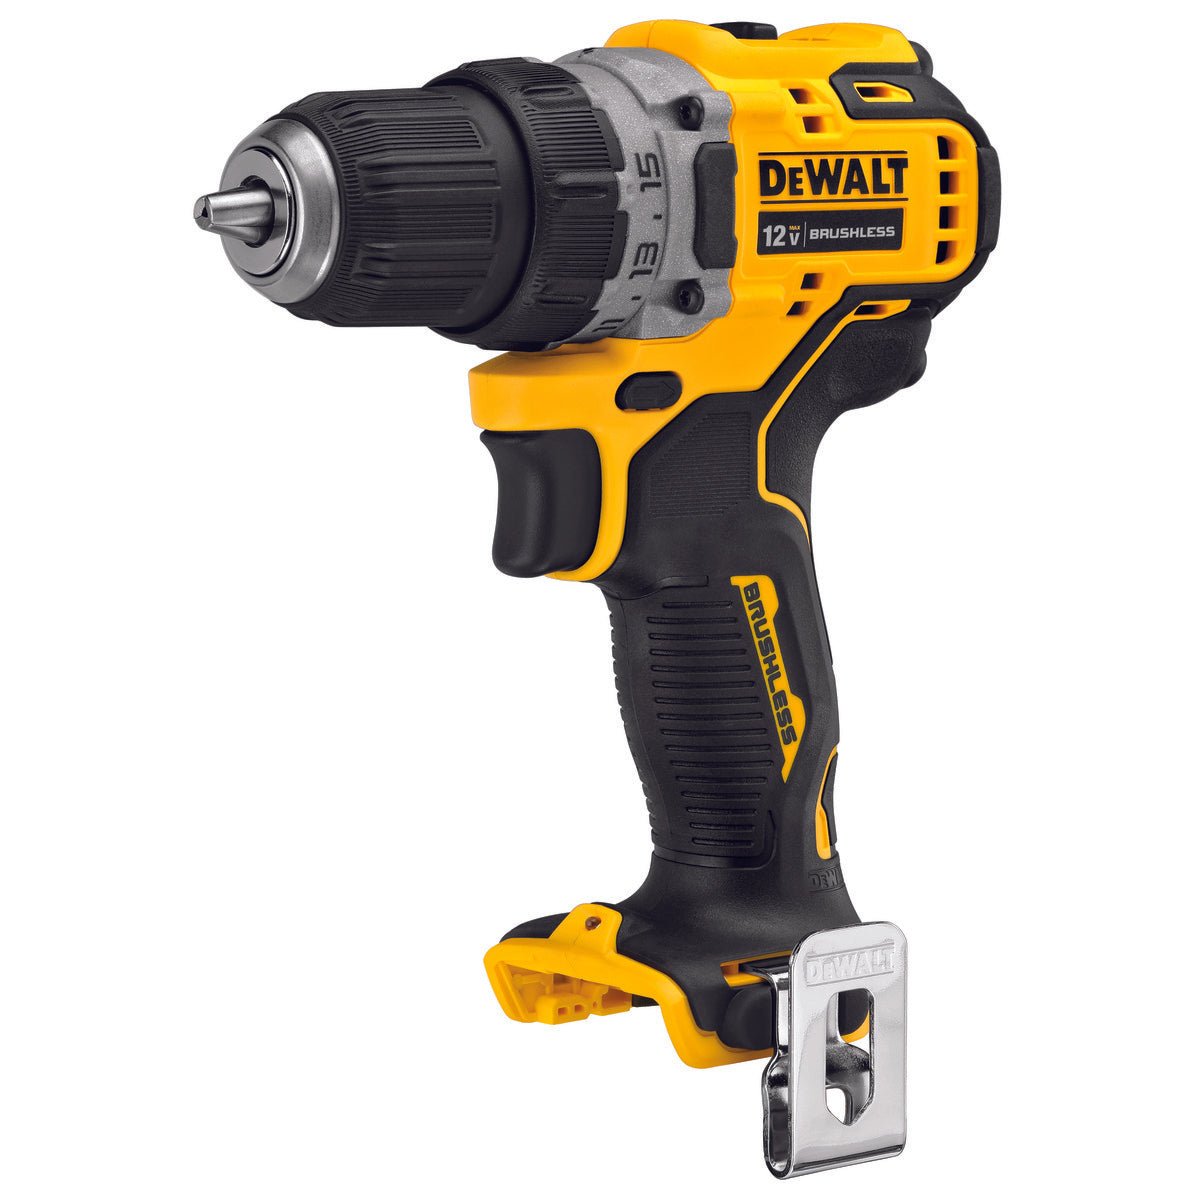 DEWALT DCD701B XTREME™ 12V MAX* BRUSHLESS 3/8 IN. CORDLESS DRILL/DRIVER (TOOL ONLY)